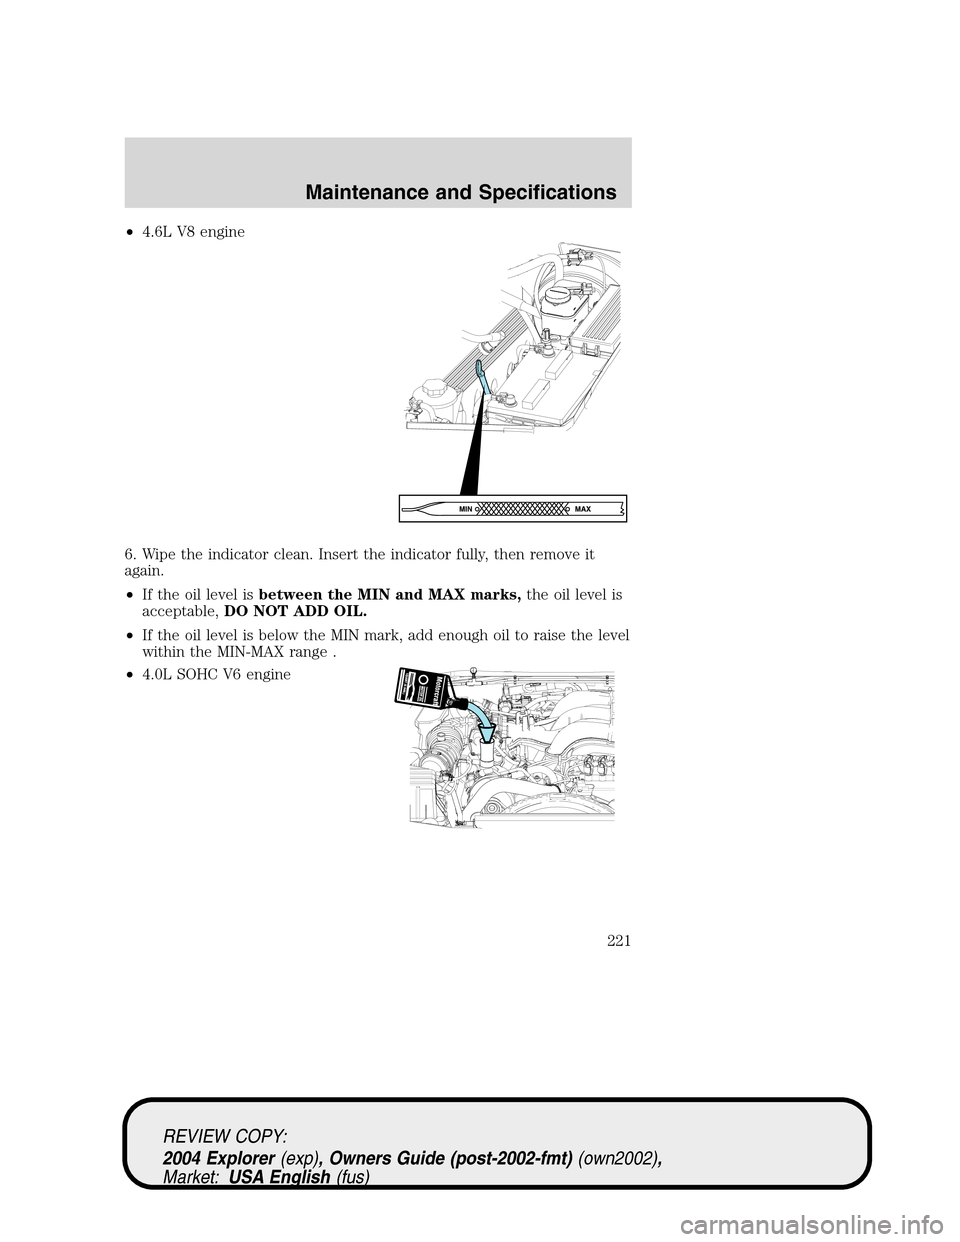 Mercury Mountaineer 2004  s Owners Guide •4.6L V8 engine
6. Wipe the indicator clean. Insert the indicator fully, then remove it
again.
•If the oil level isbetween the MIN and MAX marks,the oil level is
acceptable,DO NOT ADD OIL.
•If t